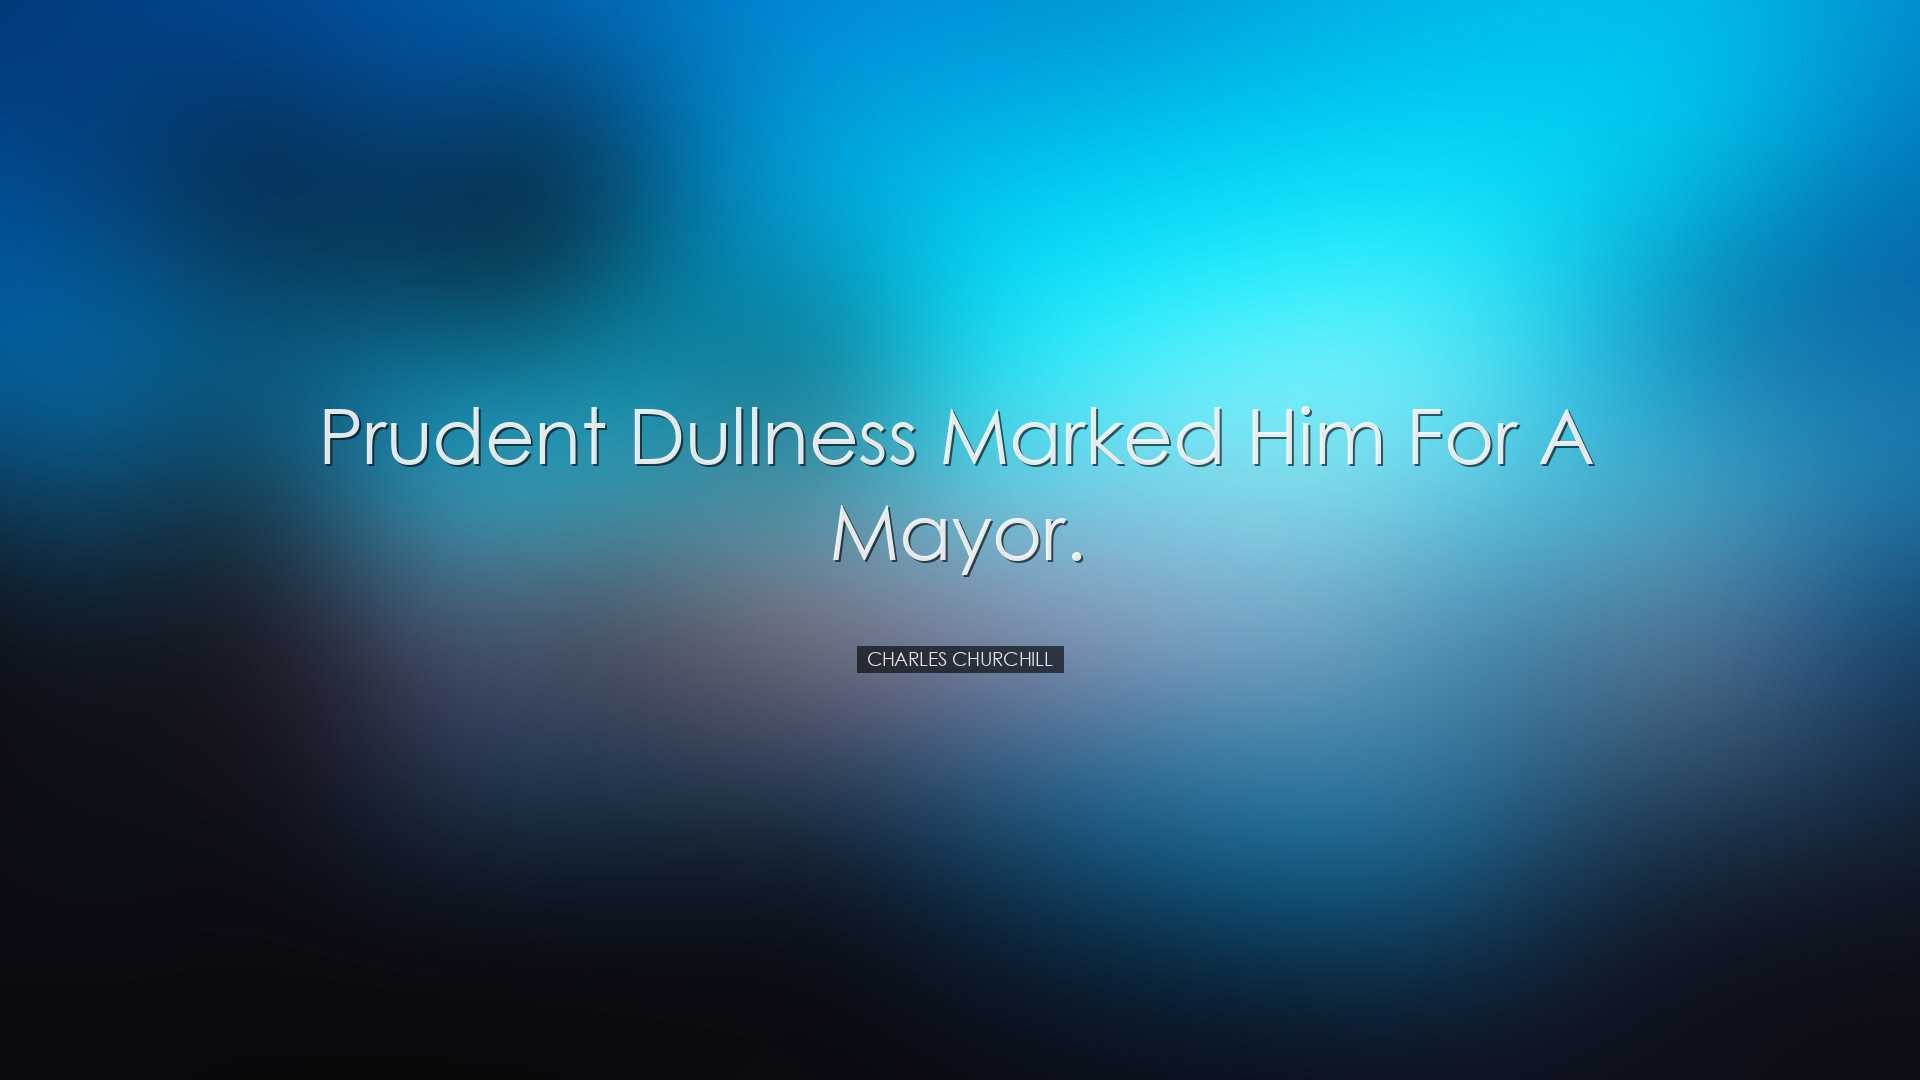 Prudent dullness marked him for a mayor. - Charles Churchill